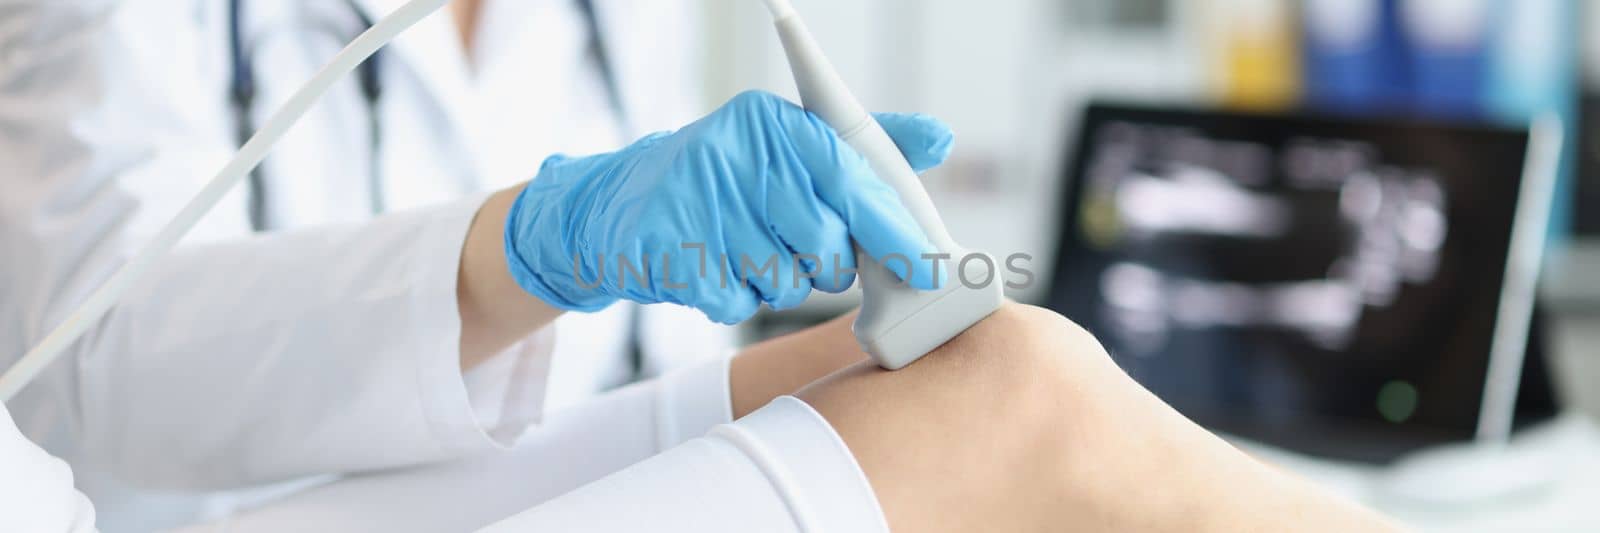 Orthopedic doctor makes ultrasound examination of patient knee in office. Young woman undergoing ultrasound of bones and joints of legs in clinic